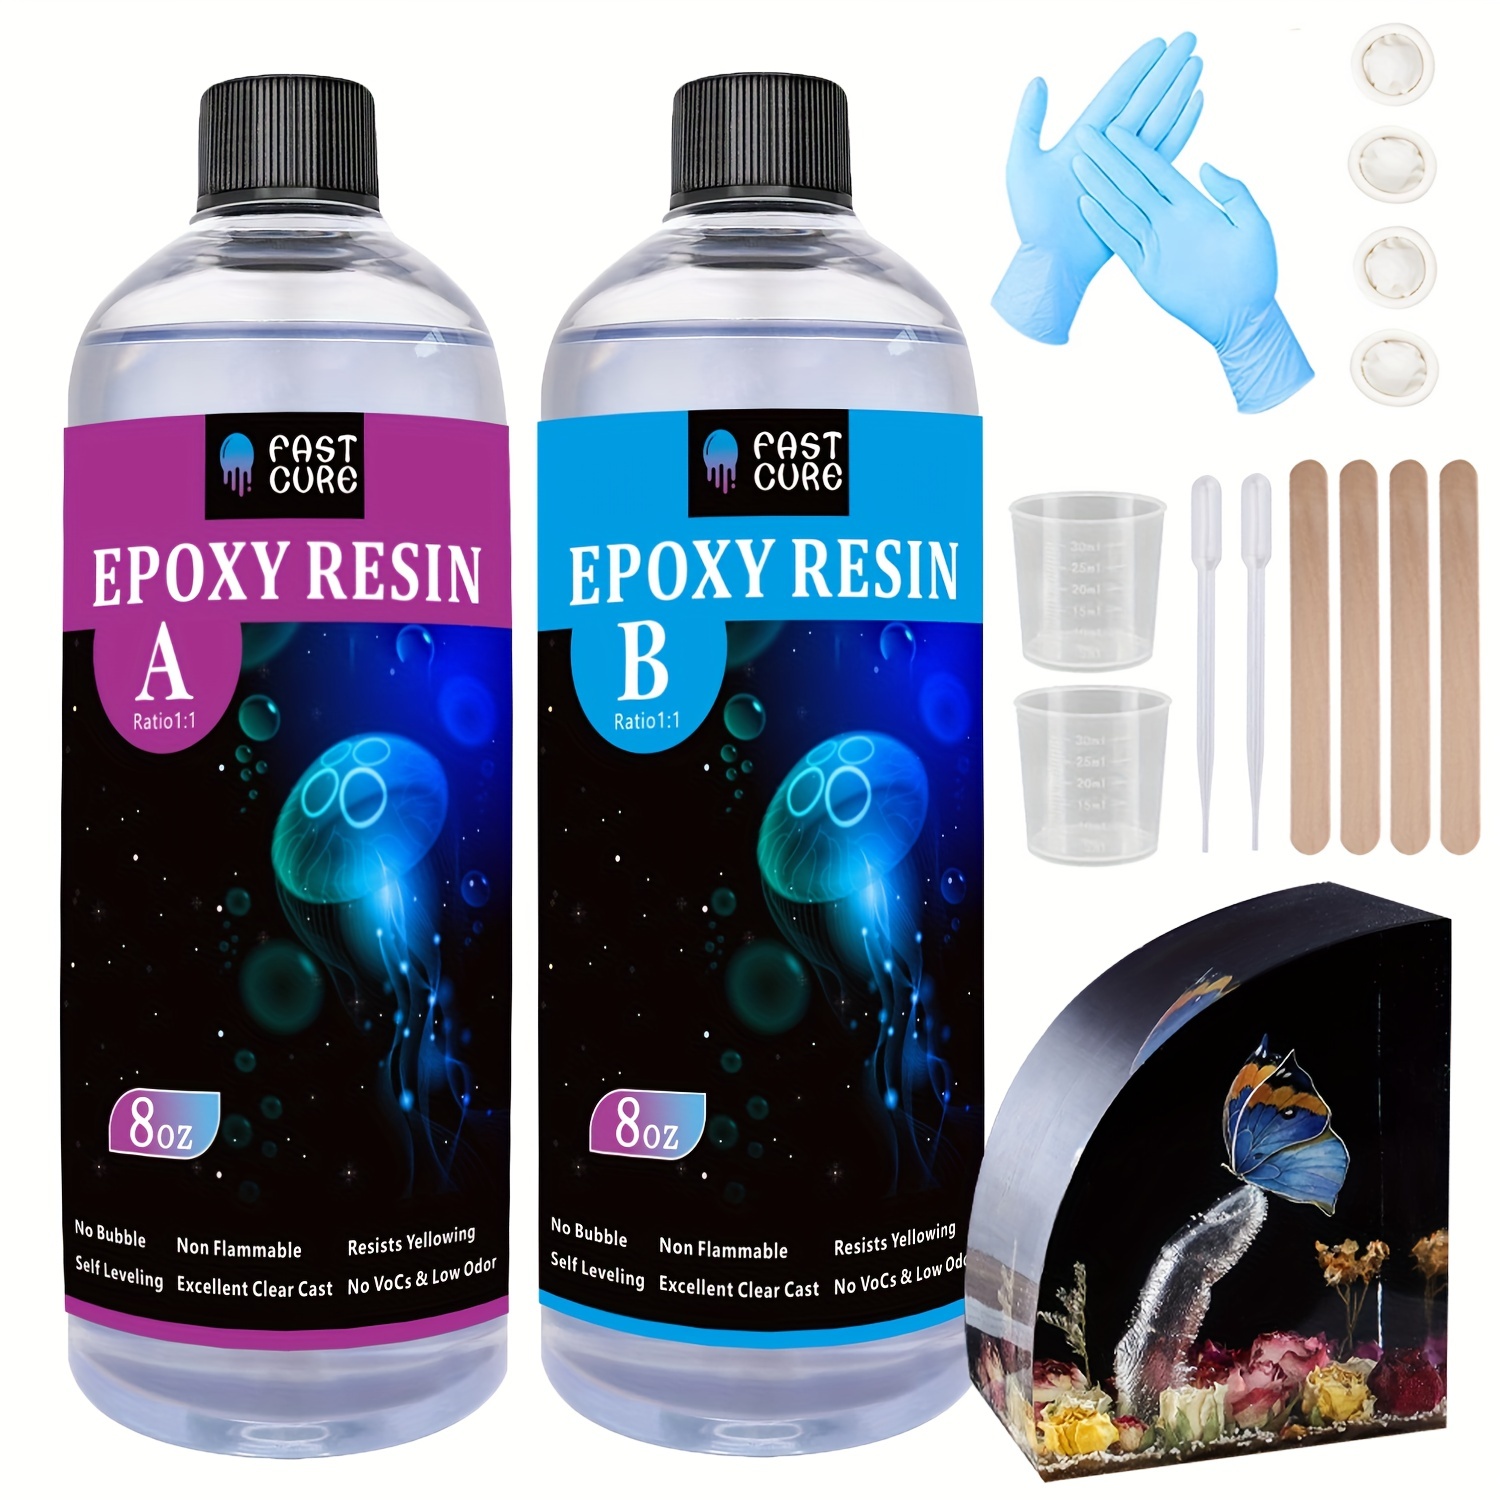 Nicpro 1 Gallon Crystal Clear Epoxy Resin Kit, Casting and Coating